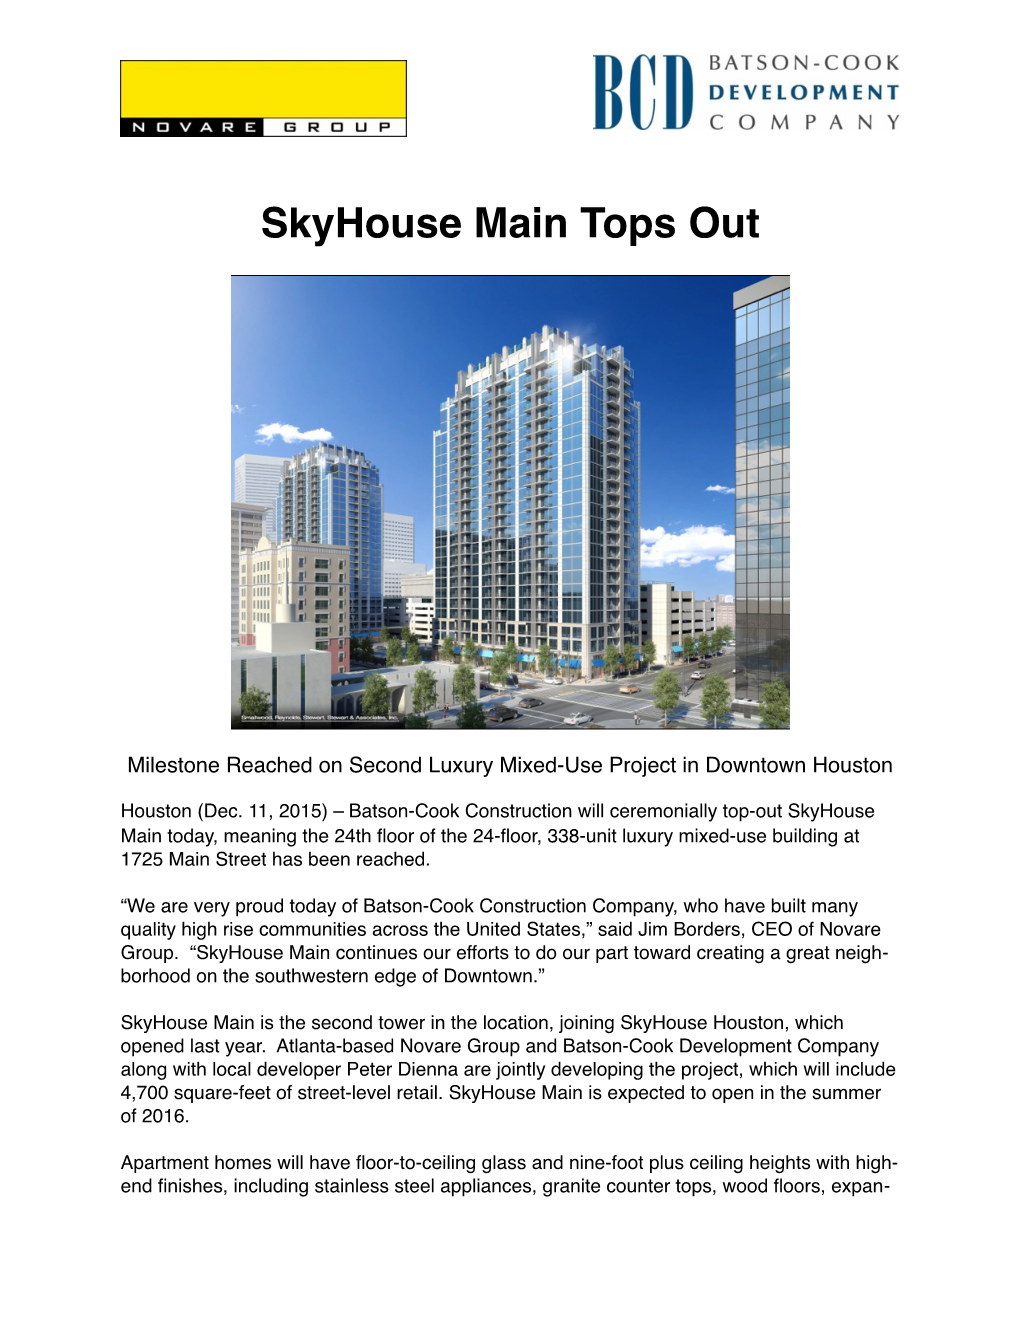 Skyhouse Main Tops Out